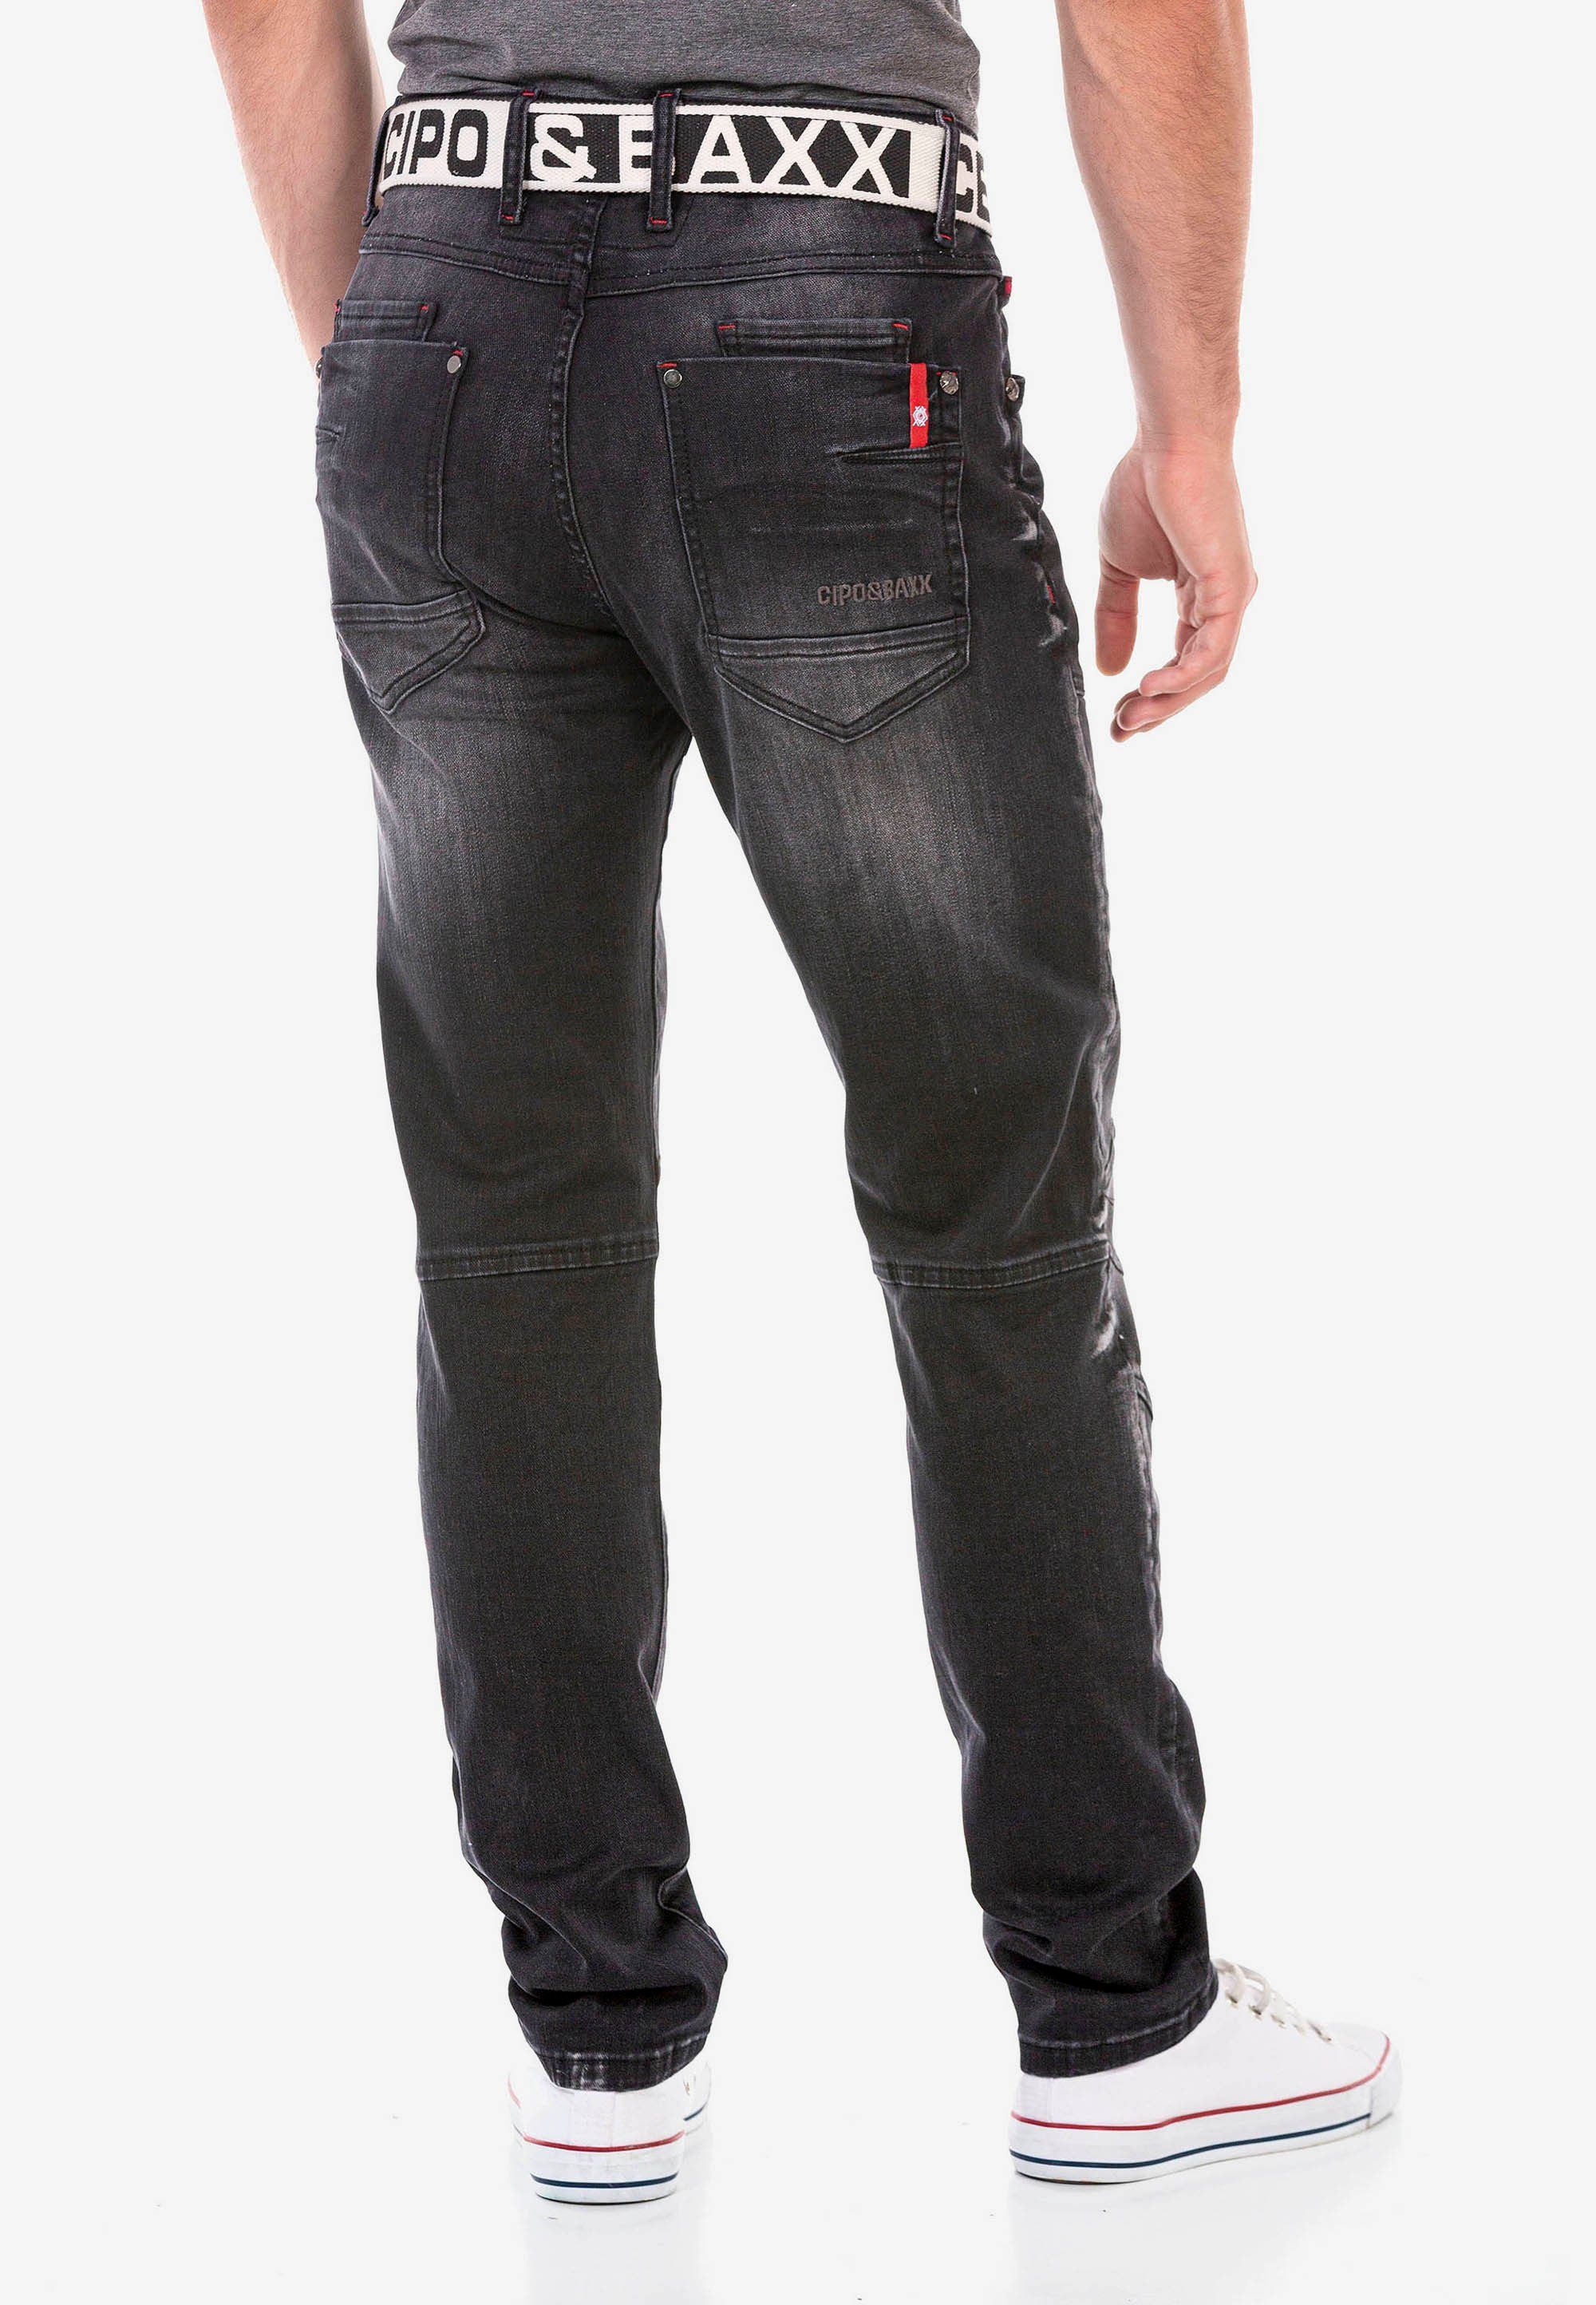 Baxx & Used-Waschung Straight-Jeans mit cooler Cipo